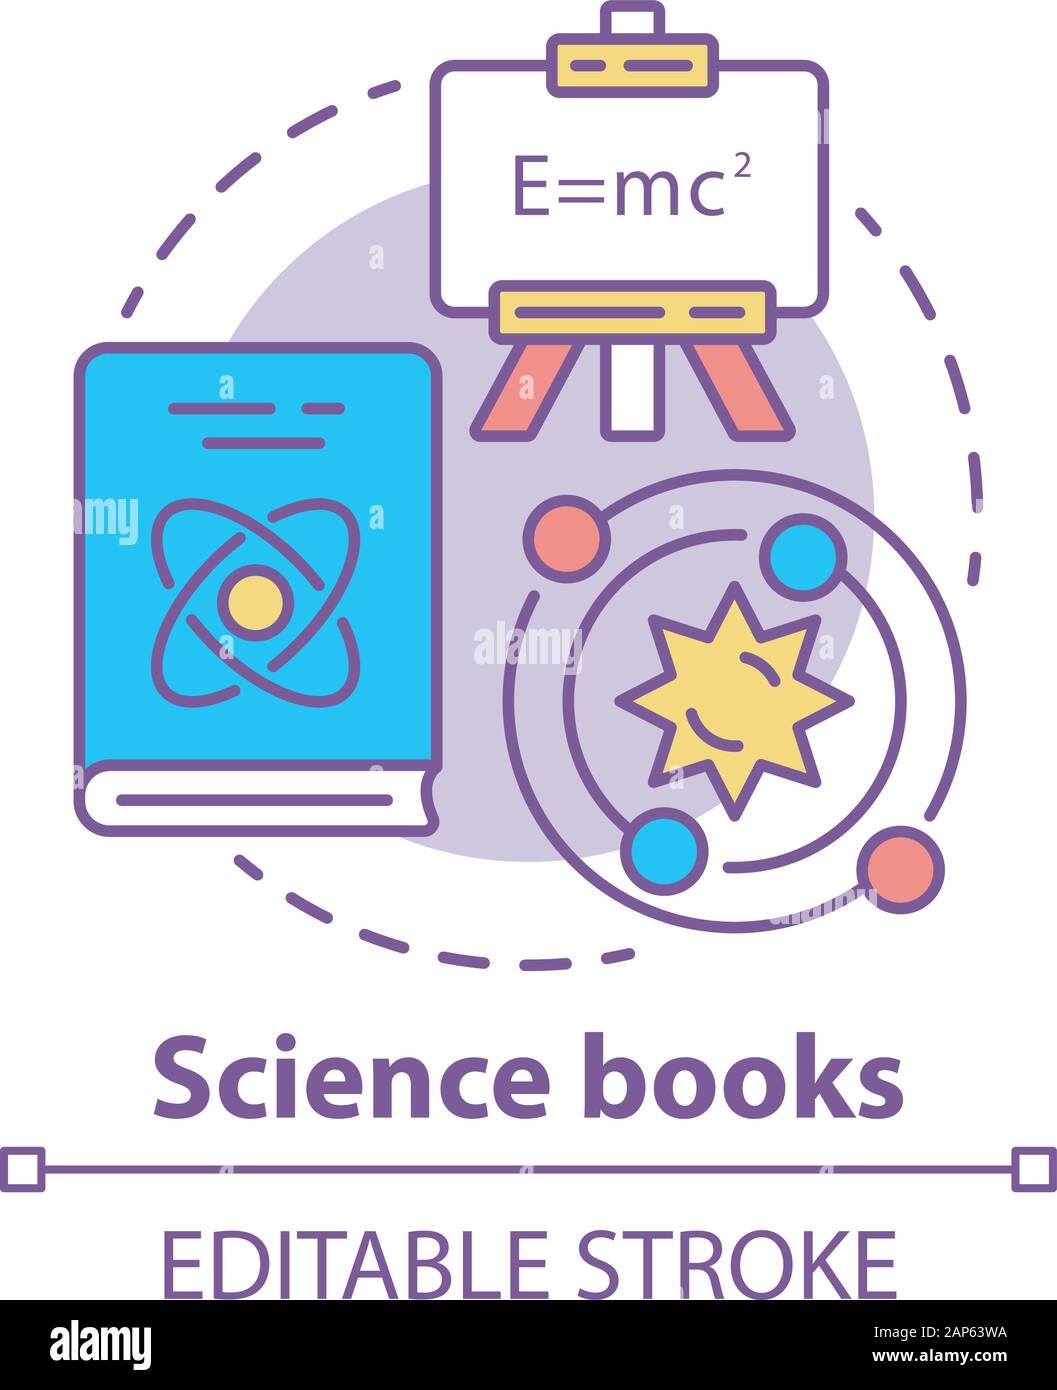 Science books concept icon. Scientific literature idea thin line illustration. Academic paper research, tractate. Physics and astronomy encyclopedia. Stock Vector